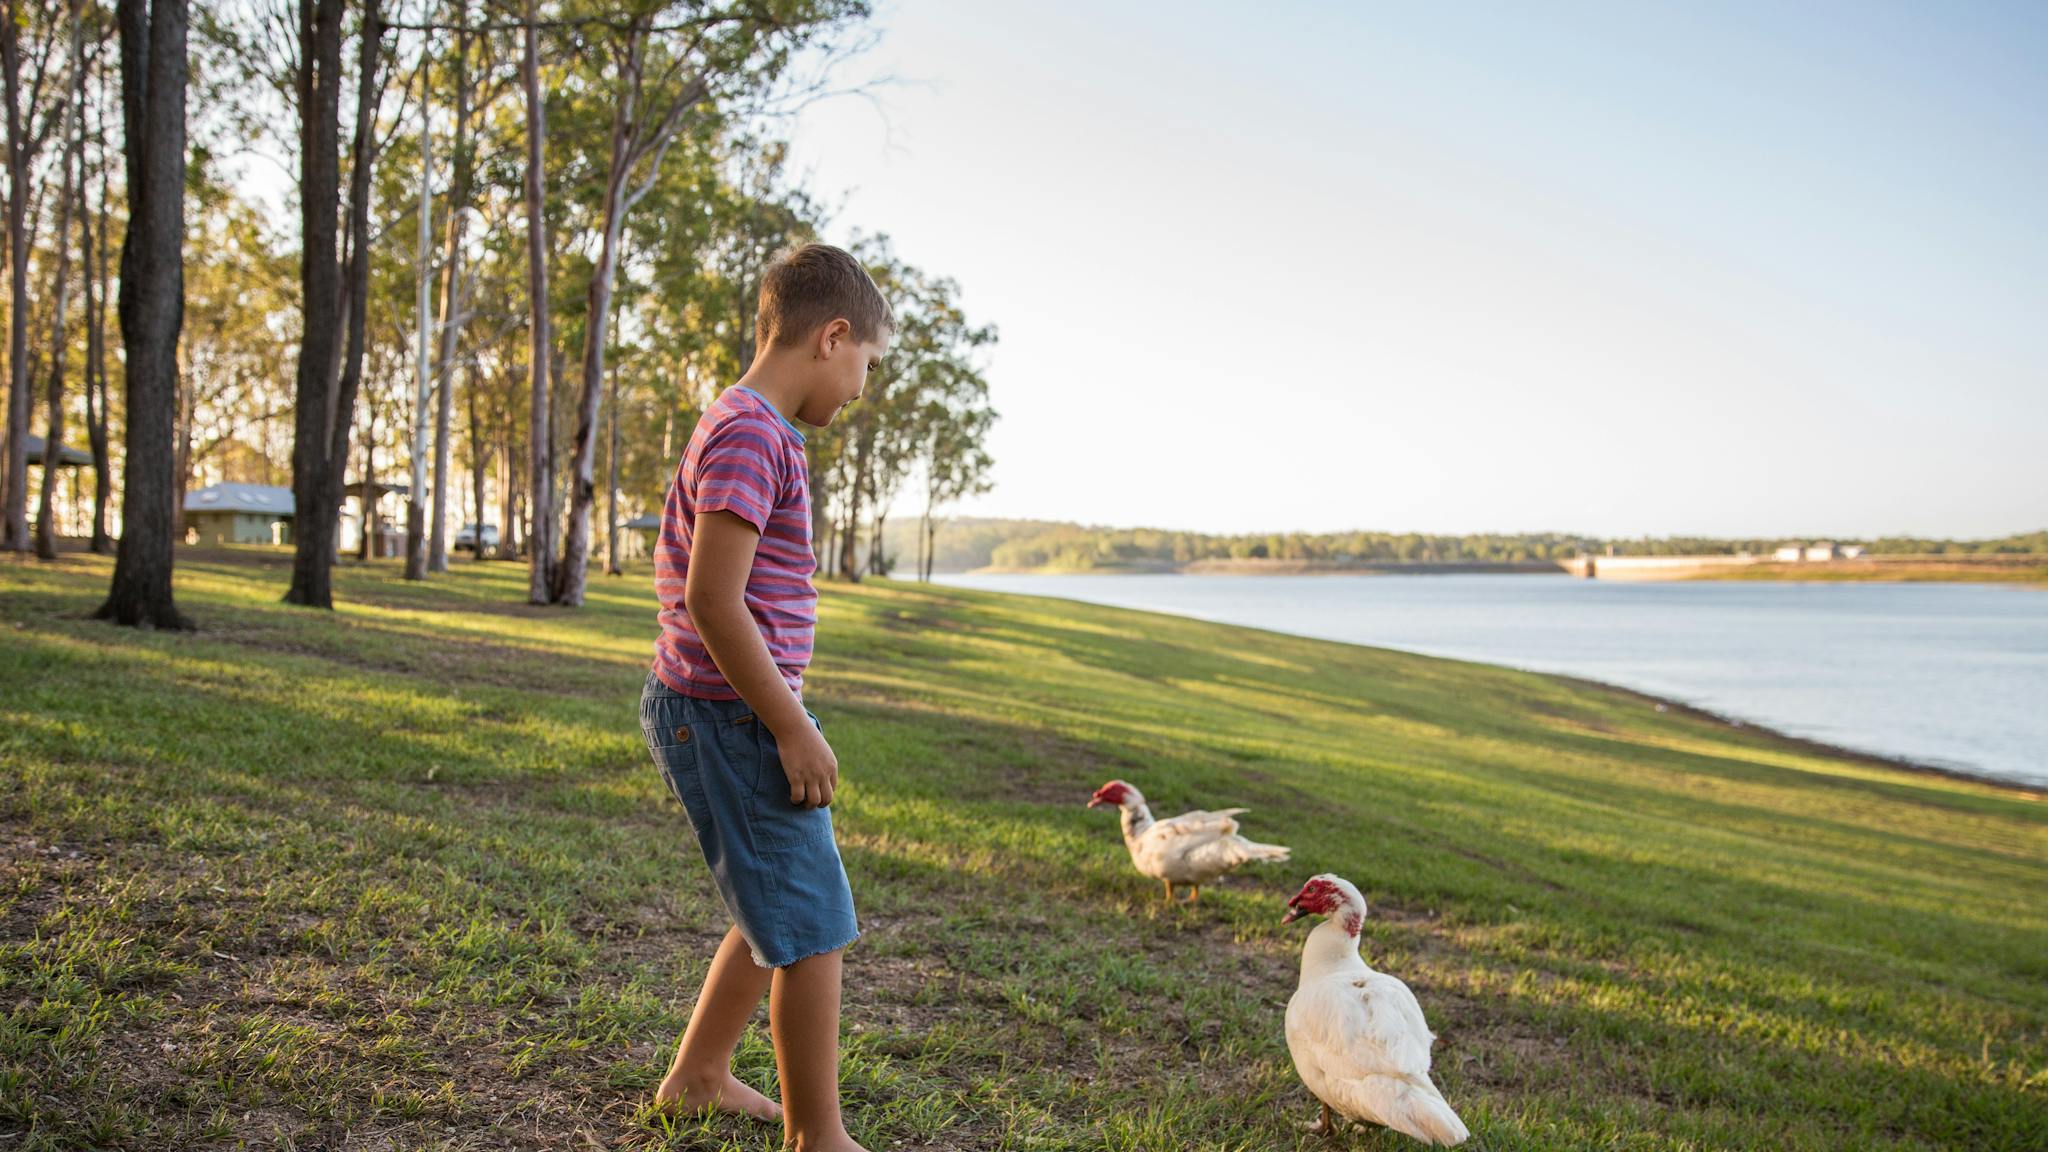 Male teenager standing beside two white ducks on grass beside a lake